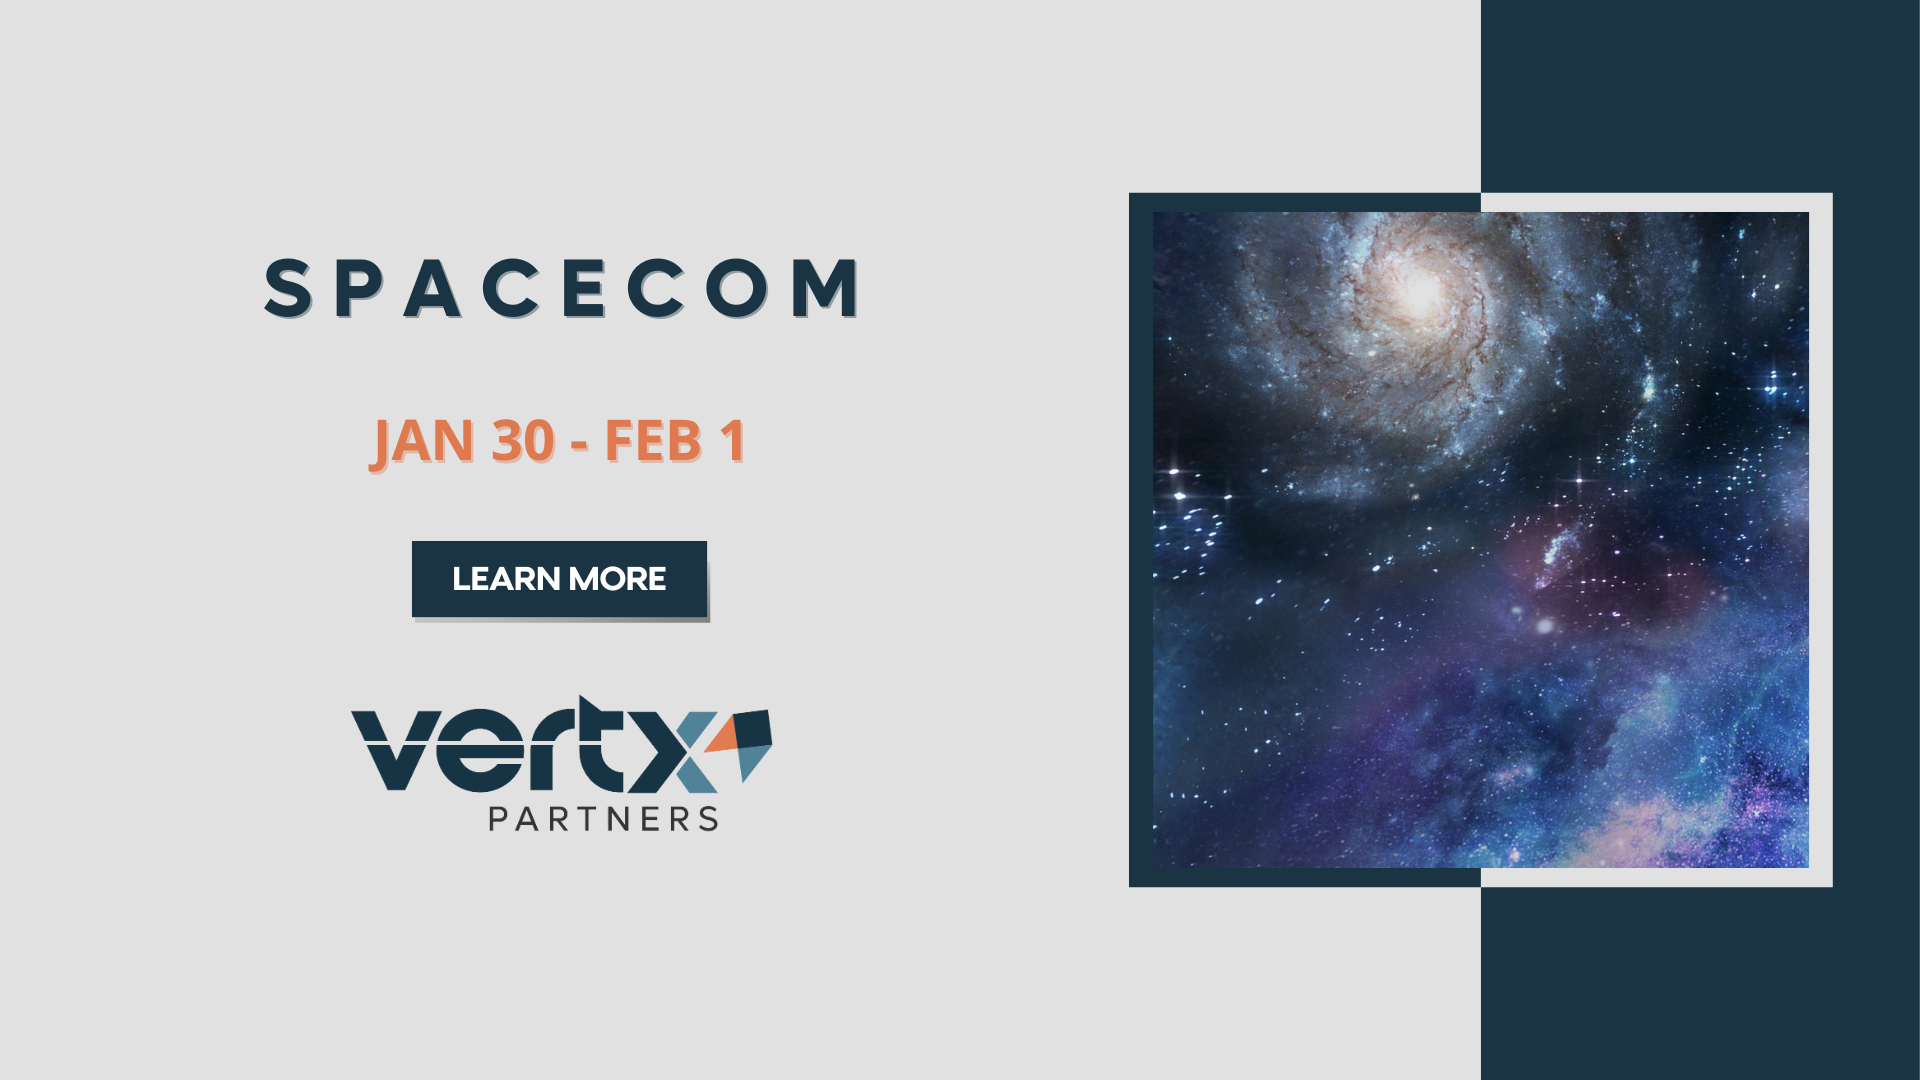 This graphic has the title spacecom with the date january 30 - feb 1 under it with a photo of the galaxy to the right of it